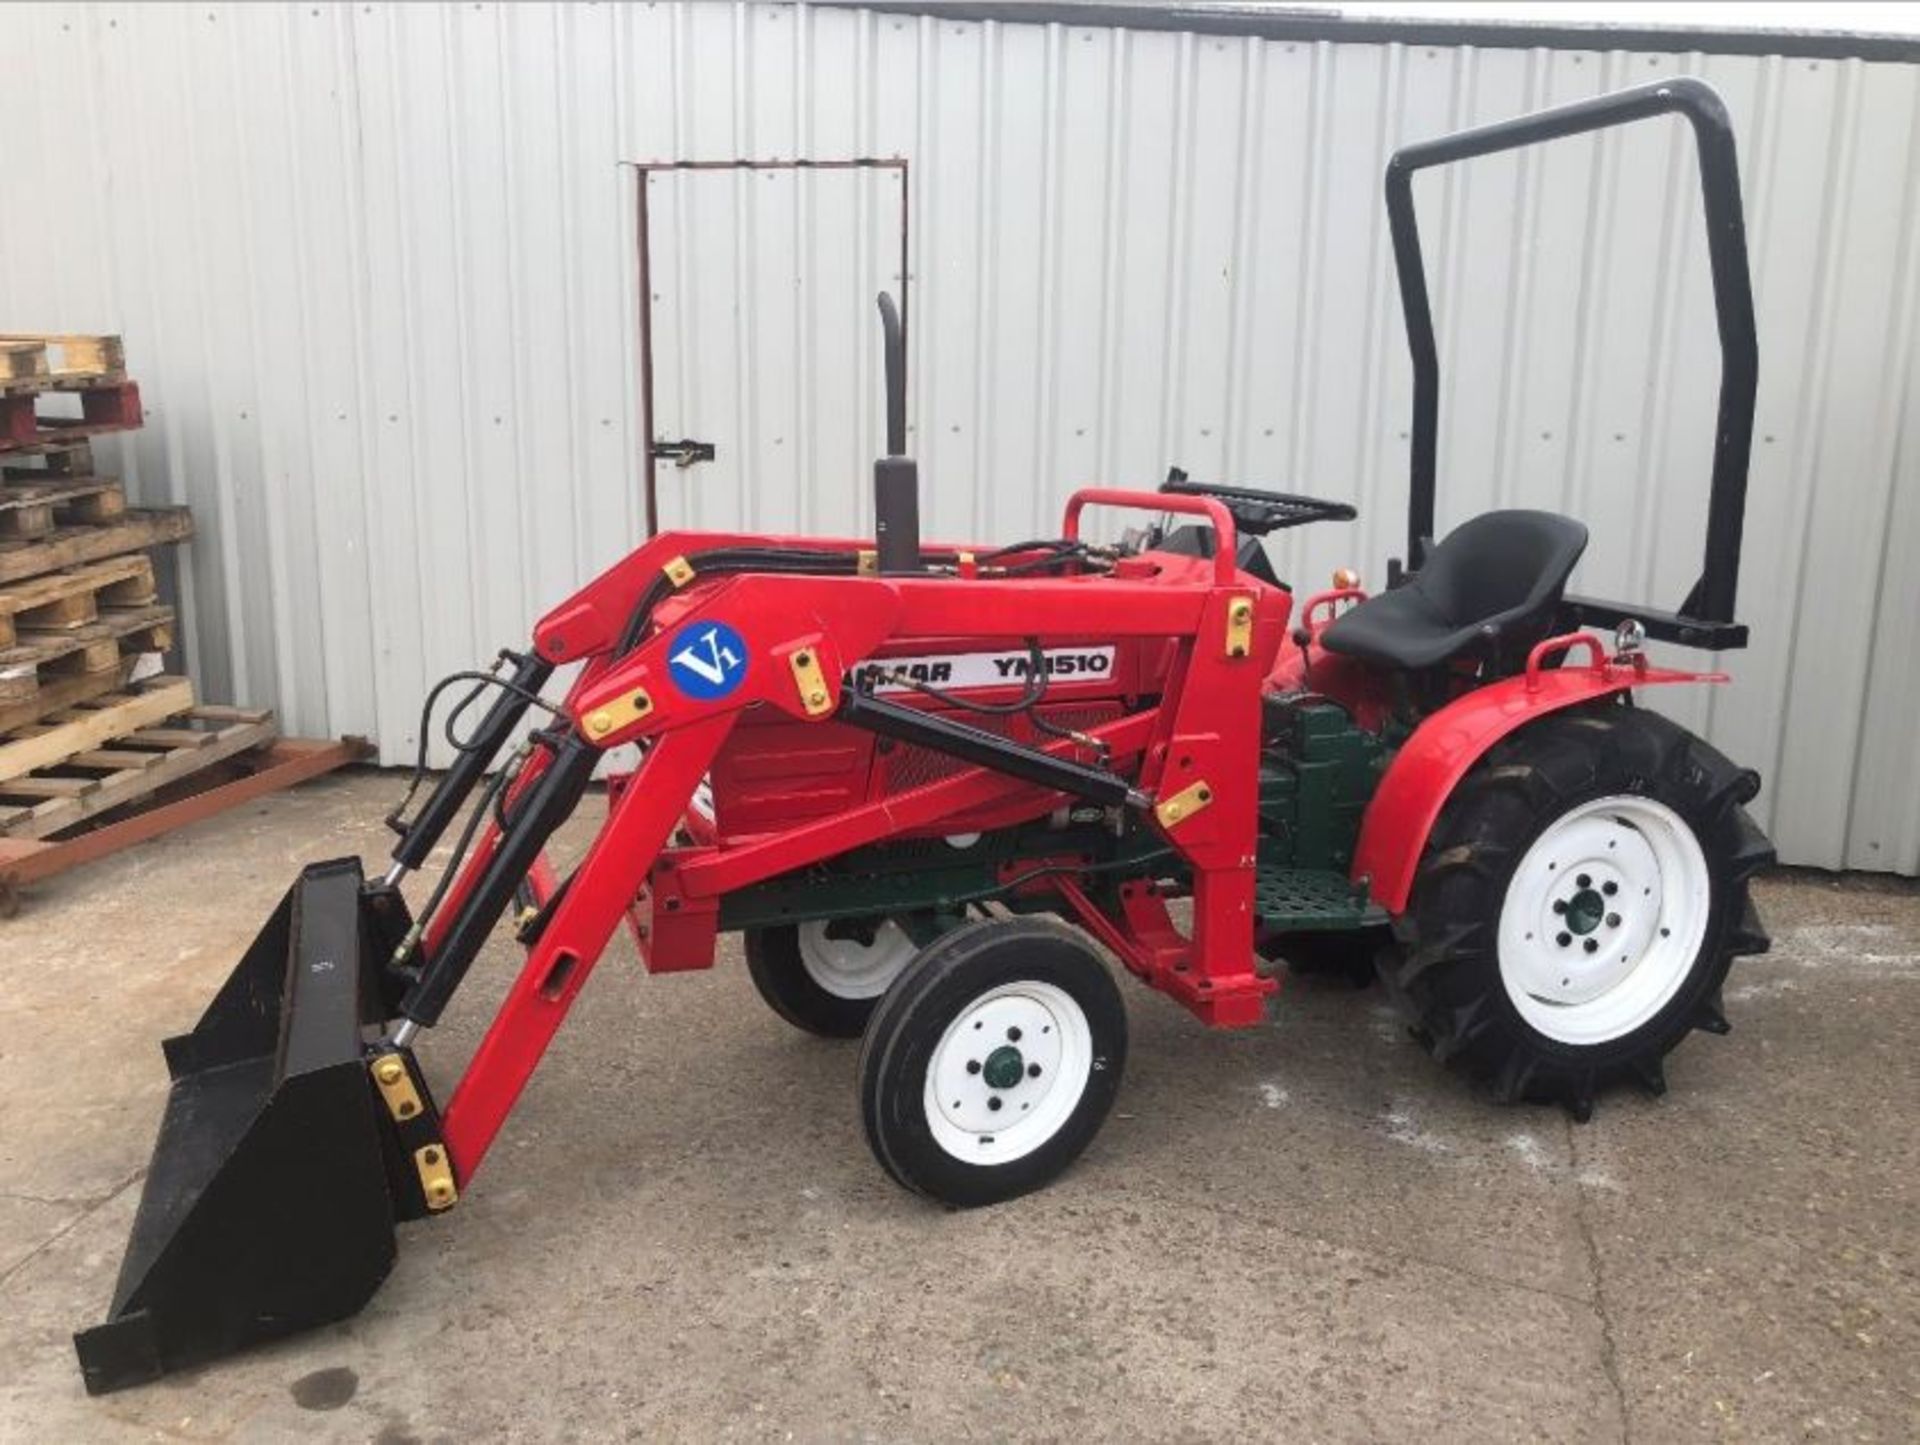 COMPACT TRACTOR YANMAR YM1510 C/W FRONT LOADER, REAR STANDARD PTO, 3 POINT LINKAGE TOP LINK ROLL BAR